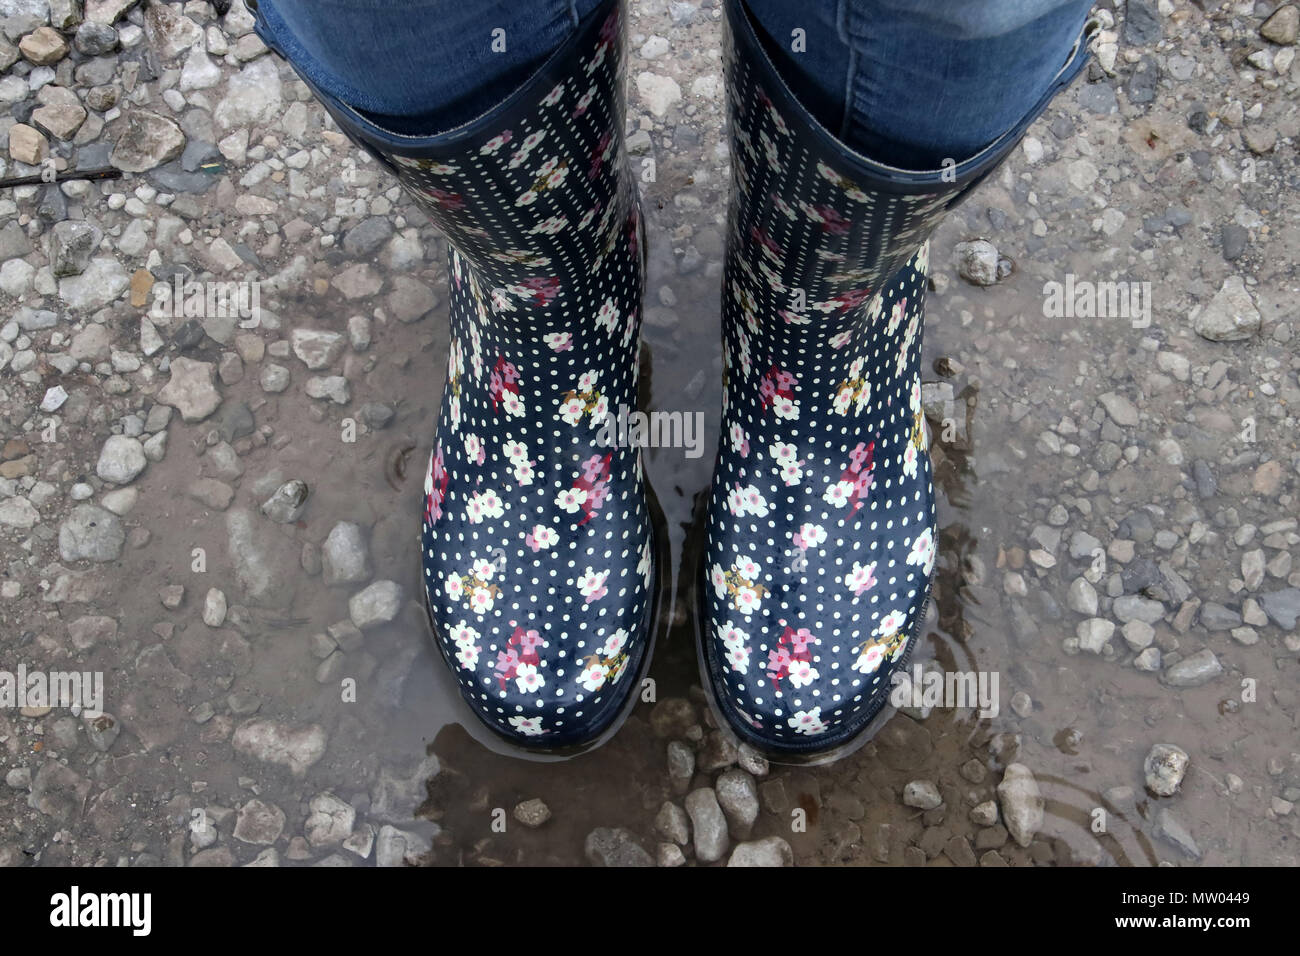 Woman wearing wellington boots standing in a puddle of water Stock Photo